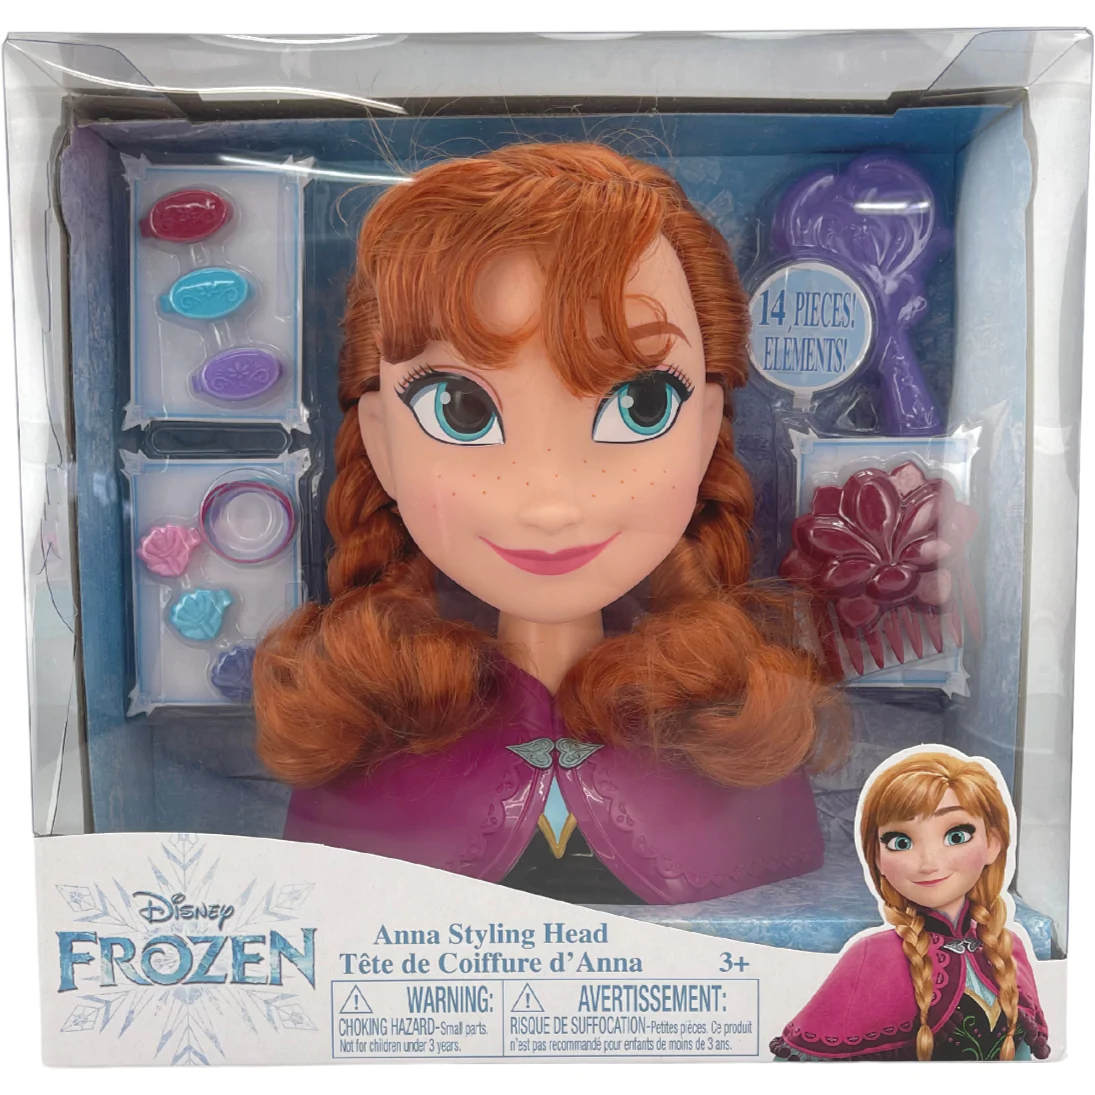 Disney Frozen Anna Styling Head / 14 Pieces Included / Doll Head / Frozen Toy **DEALS**